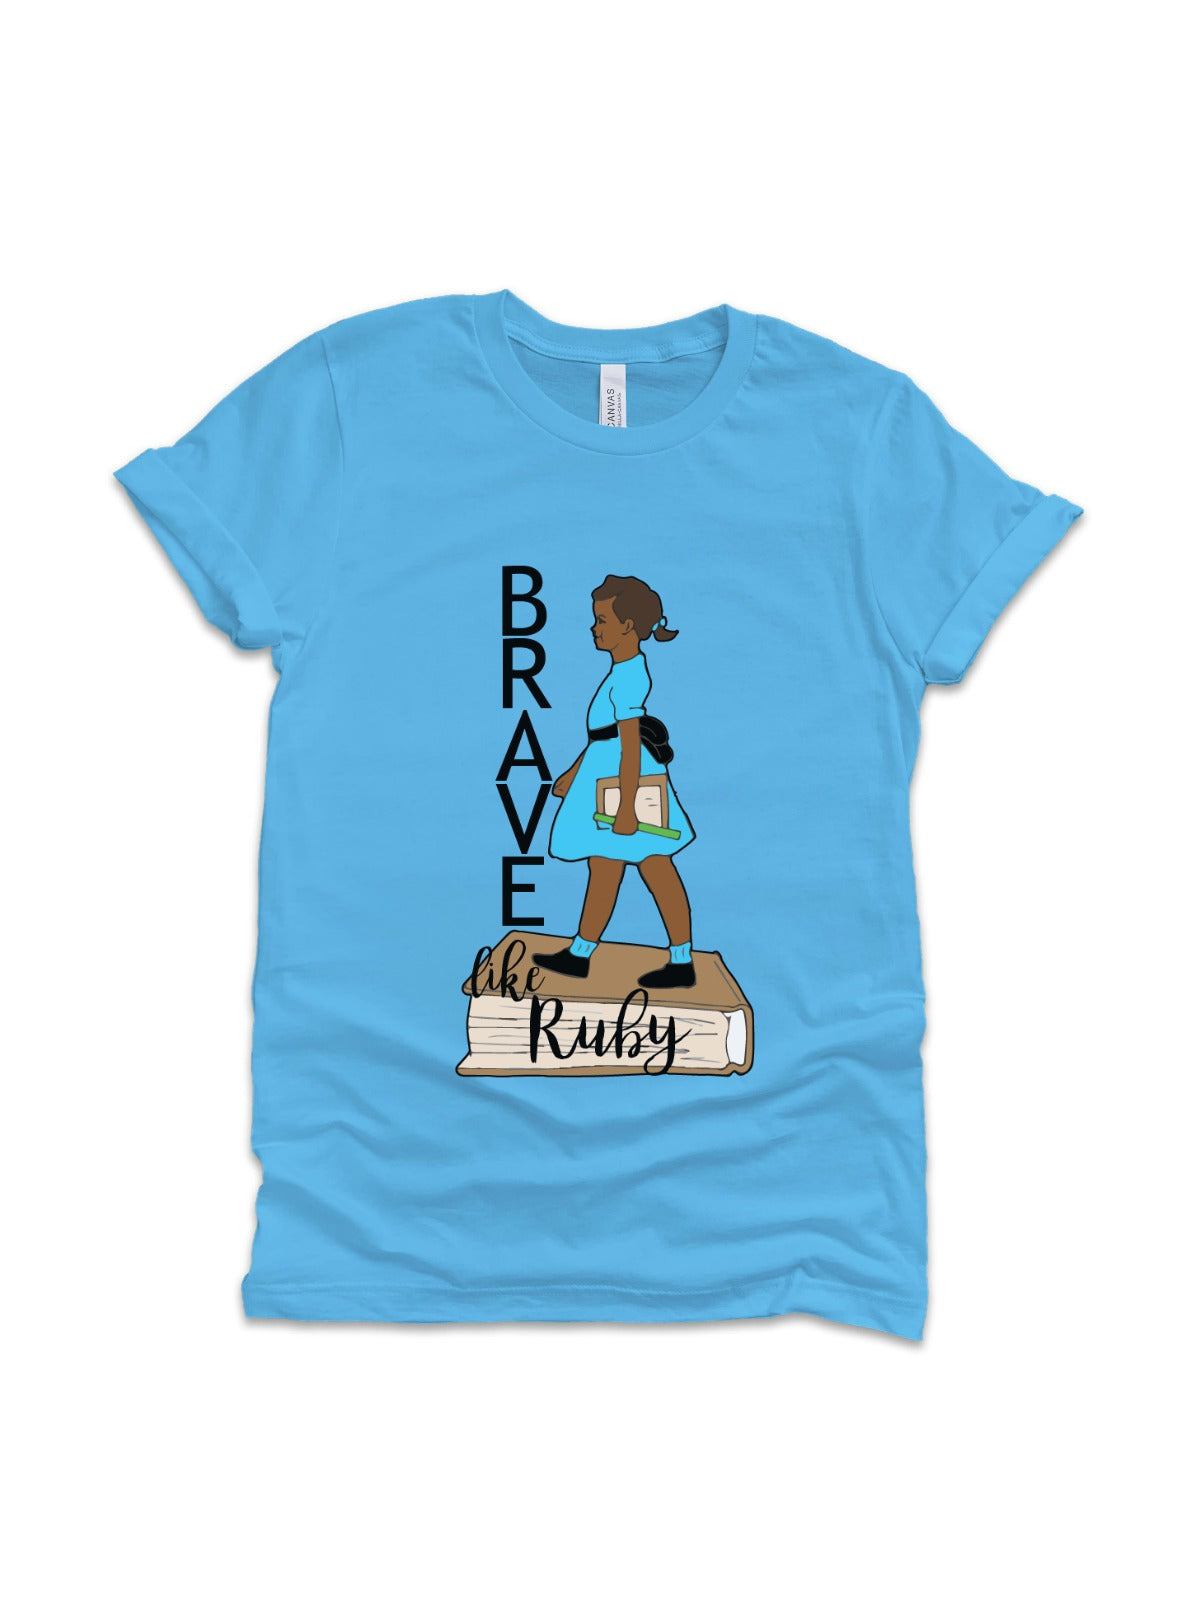 Brave like Ruby Bridges Civil Rights Shirt for Adults